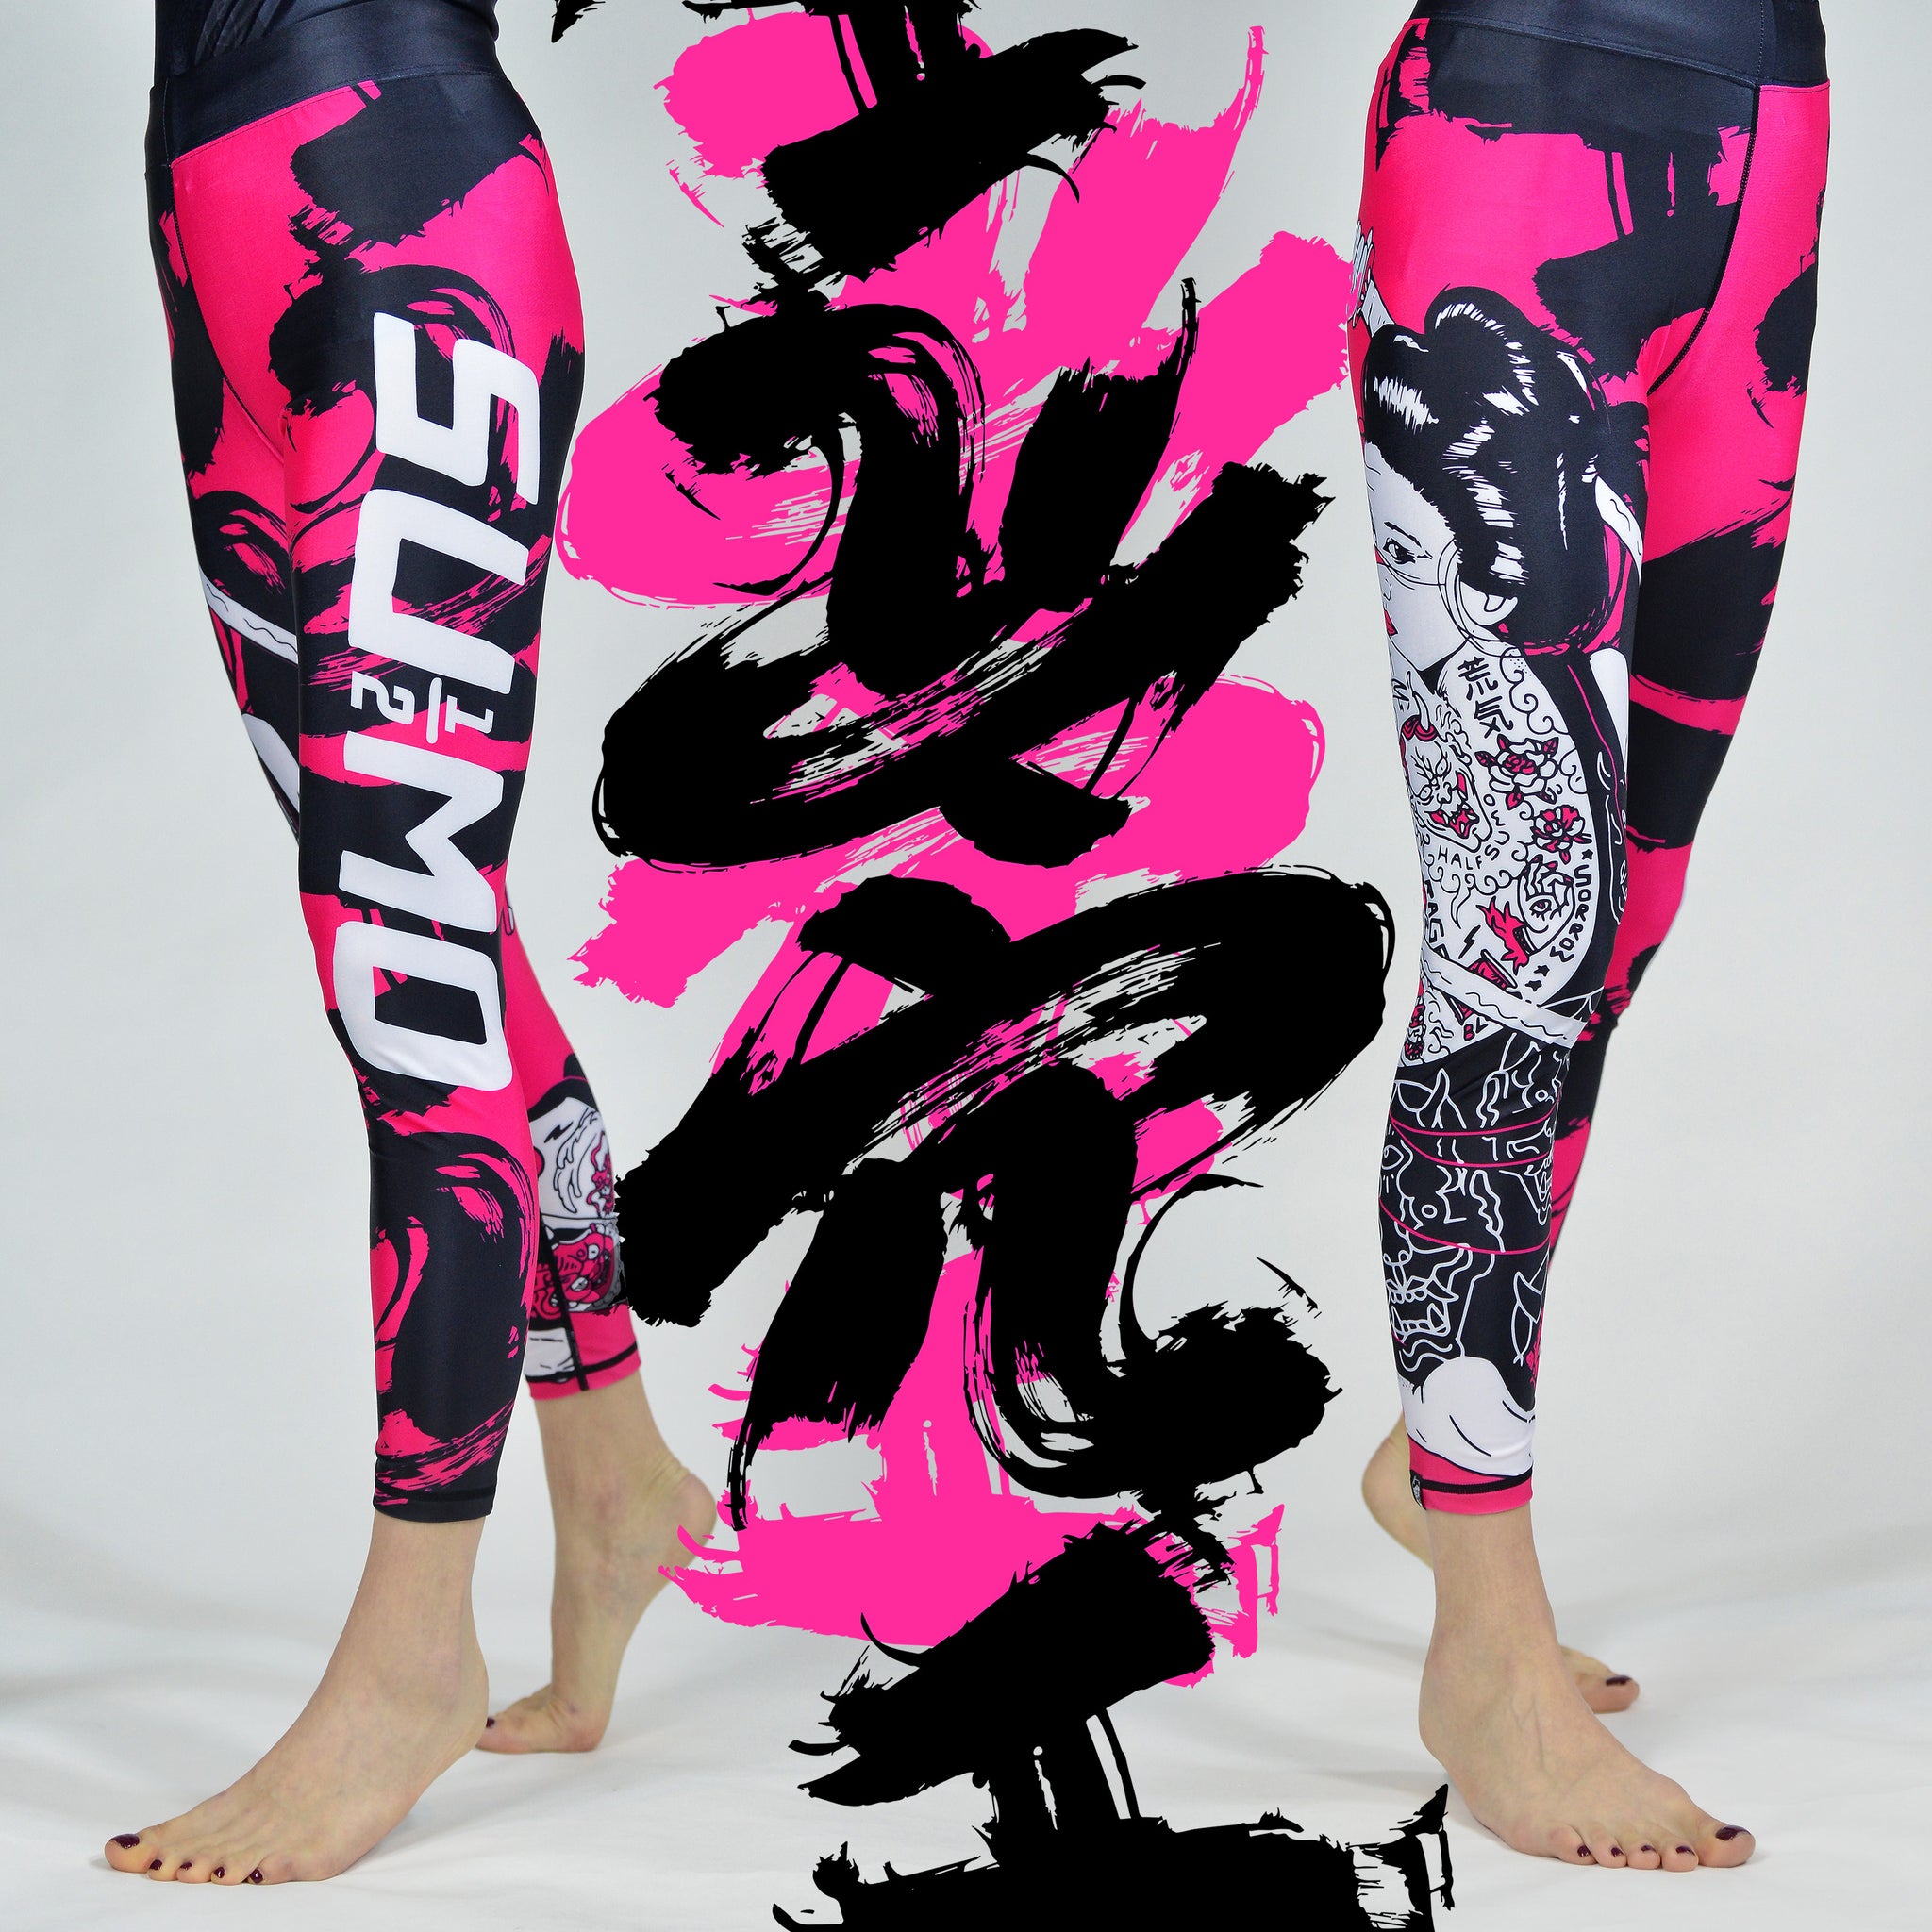 Onna Neon Spats for Women